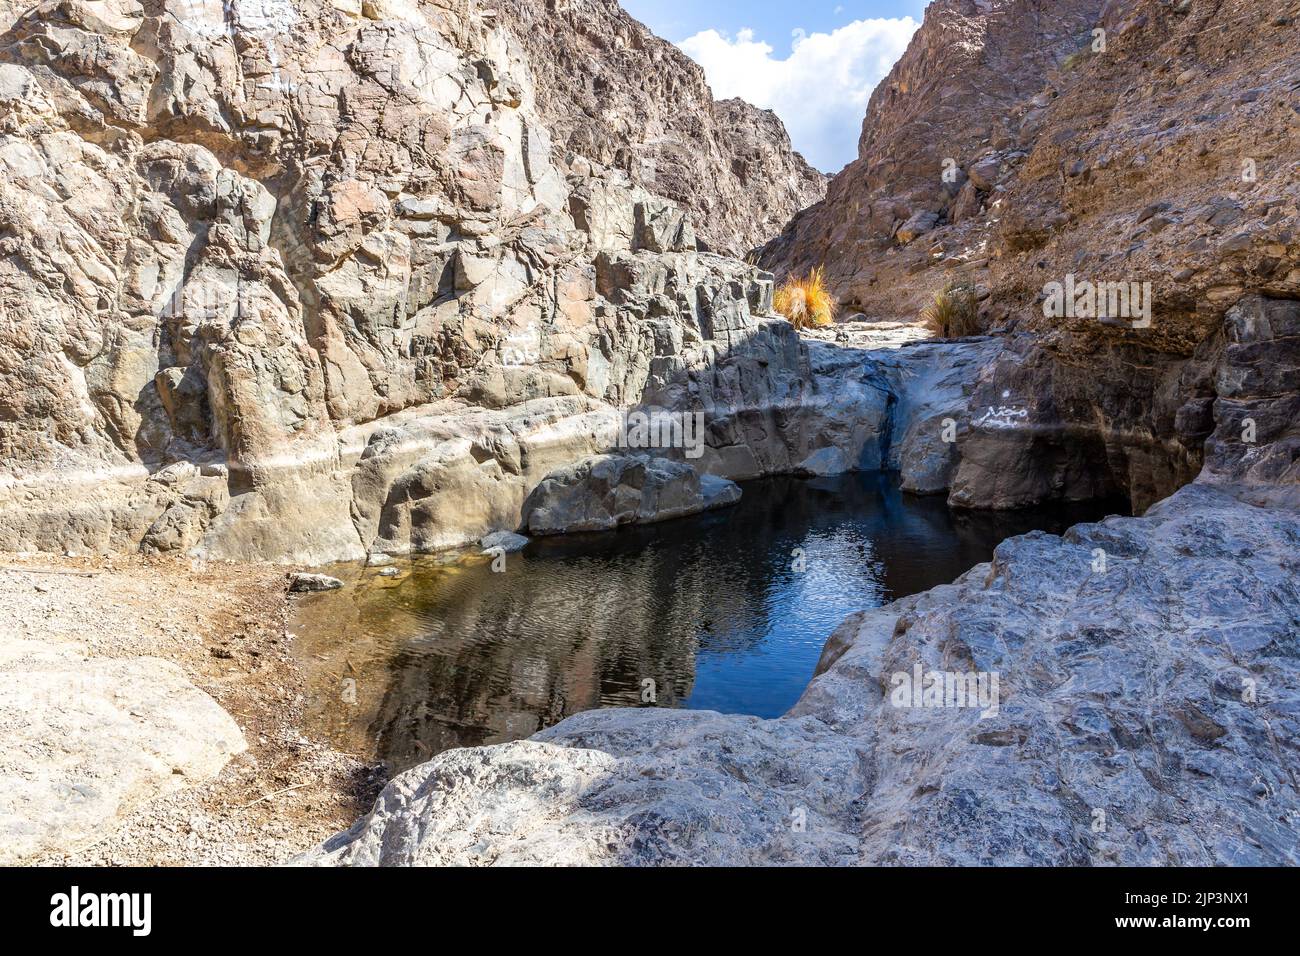 Wadi Shawka pools mountain trail in Hajar Mountains, United Arab Emirates, stony, almost dry riverbed in rocky valley. Stock Photo